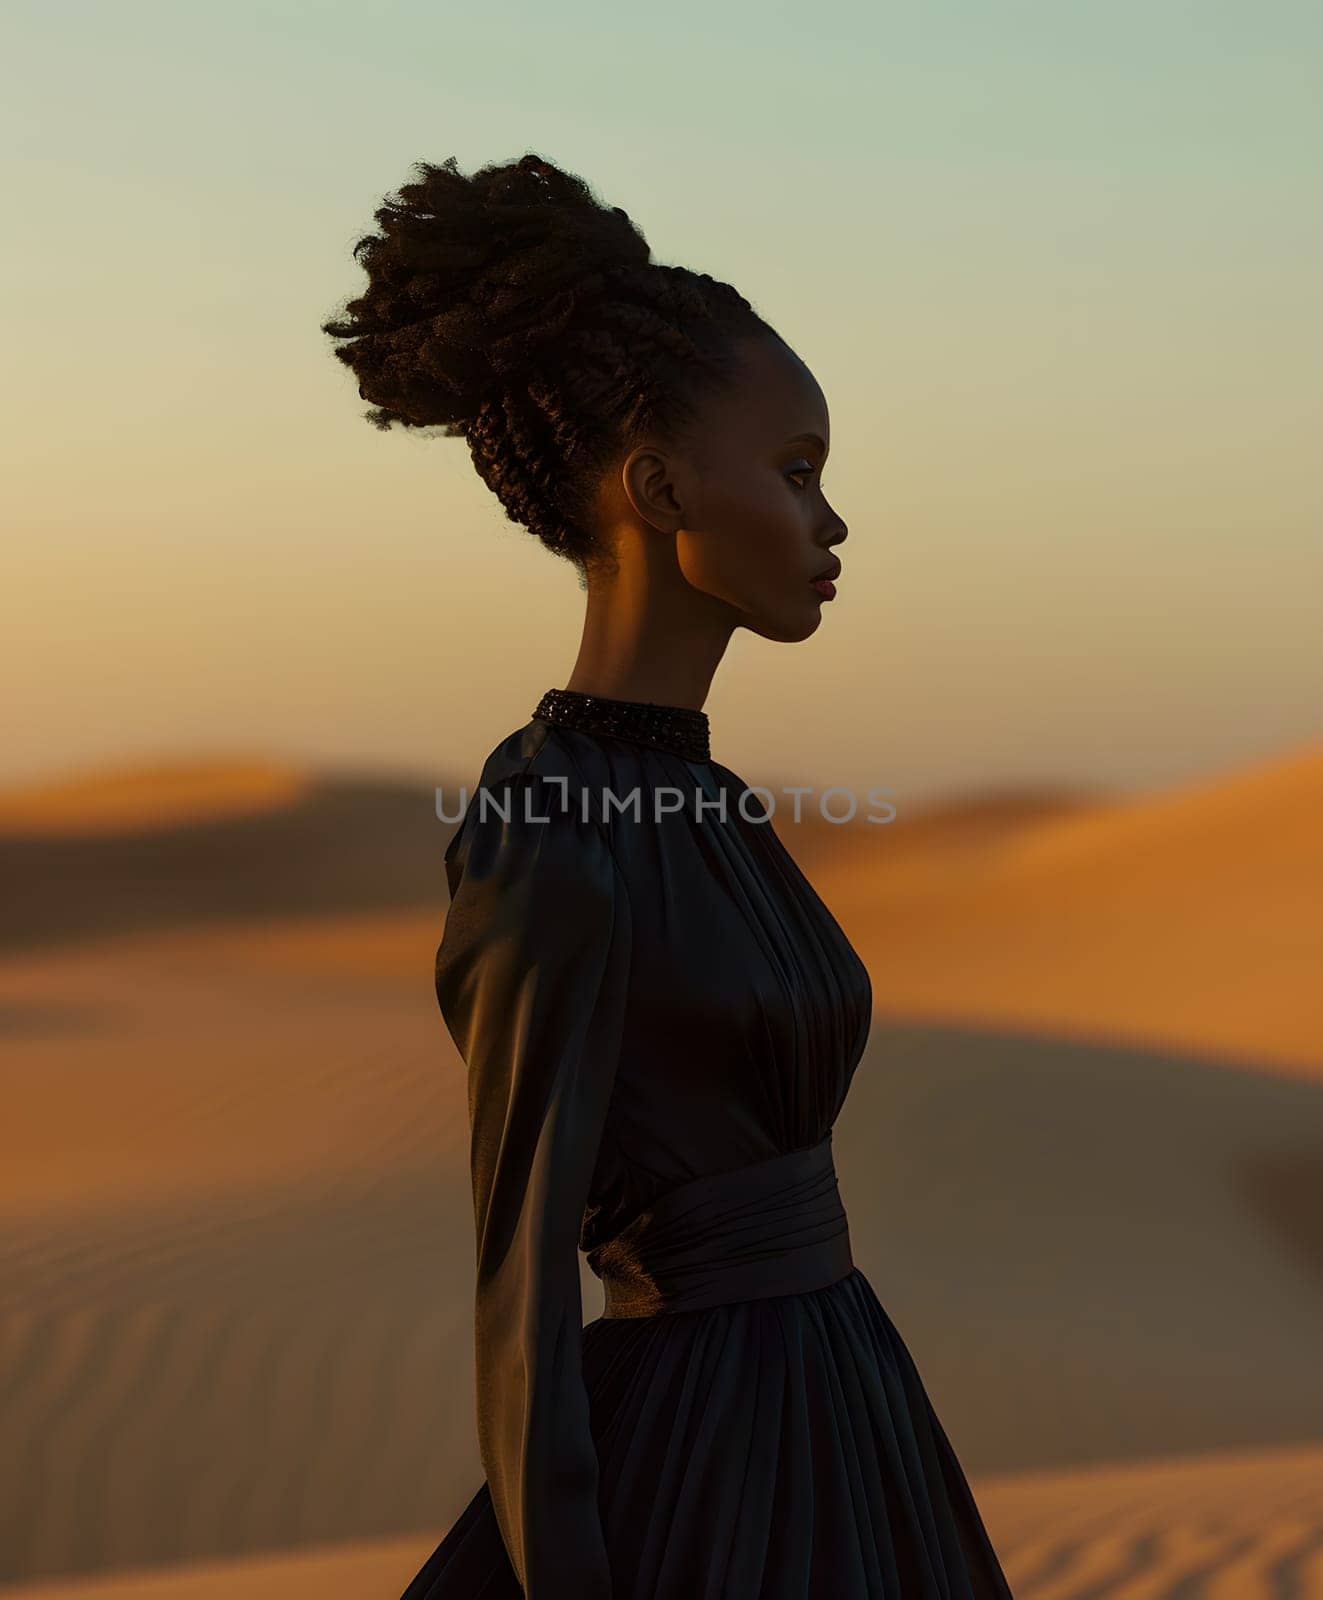 A woman in a stunning black dress is joyfully standing in the middle of a desert at dusk, surrounded by the vast landscape and colorful sky